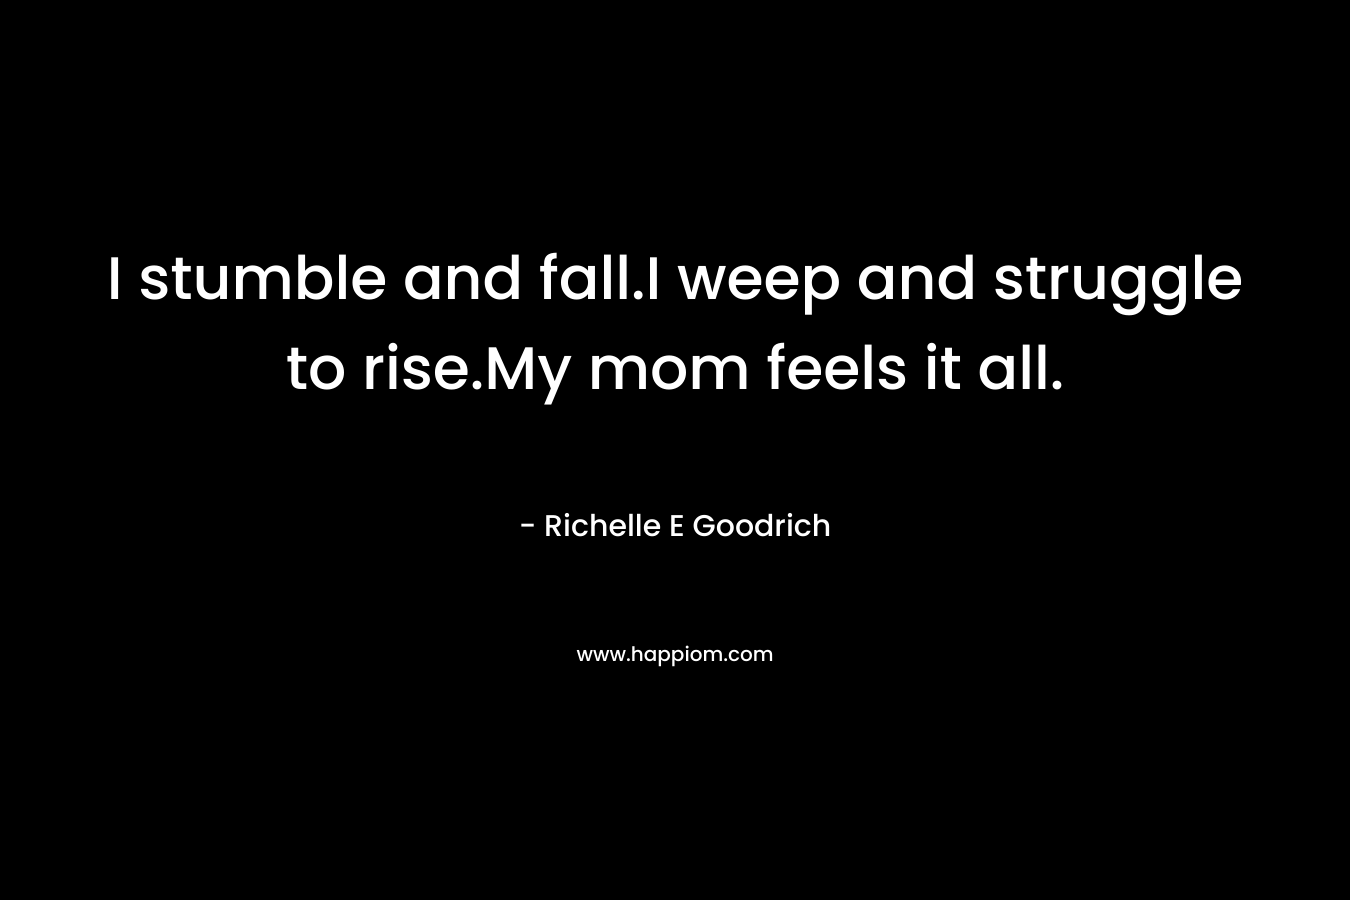 I stumble and fall.I weep and struggle to rise.My mom feels it all. – Richelle E Goodrich